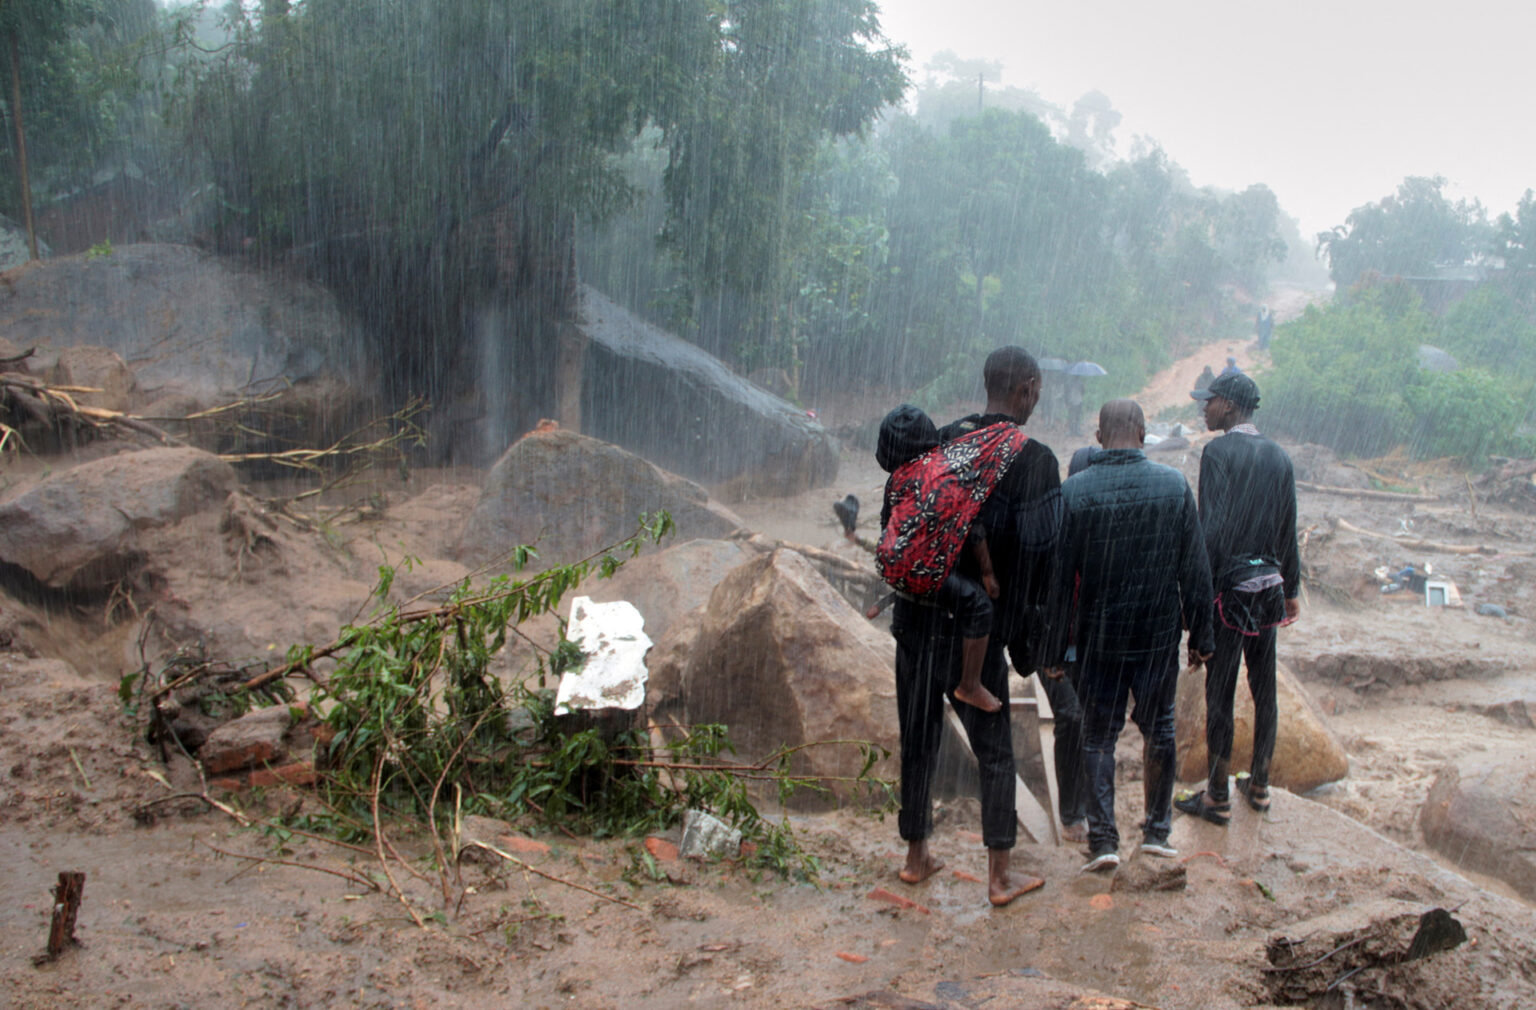 Cyclone Freddy: Malawi struggling to recover, food prices soar. In the picture a man carrying a baby on his back stands stranded with several others as rains continue to pour. Photo/TheNewHumaniterian